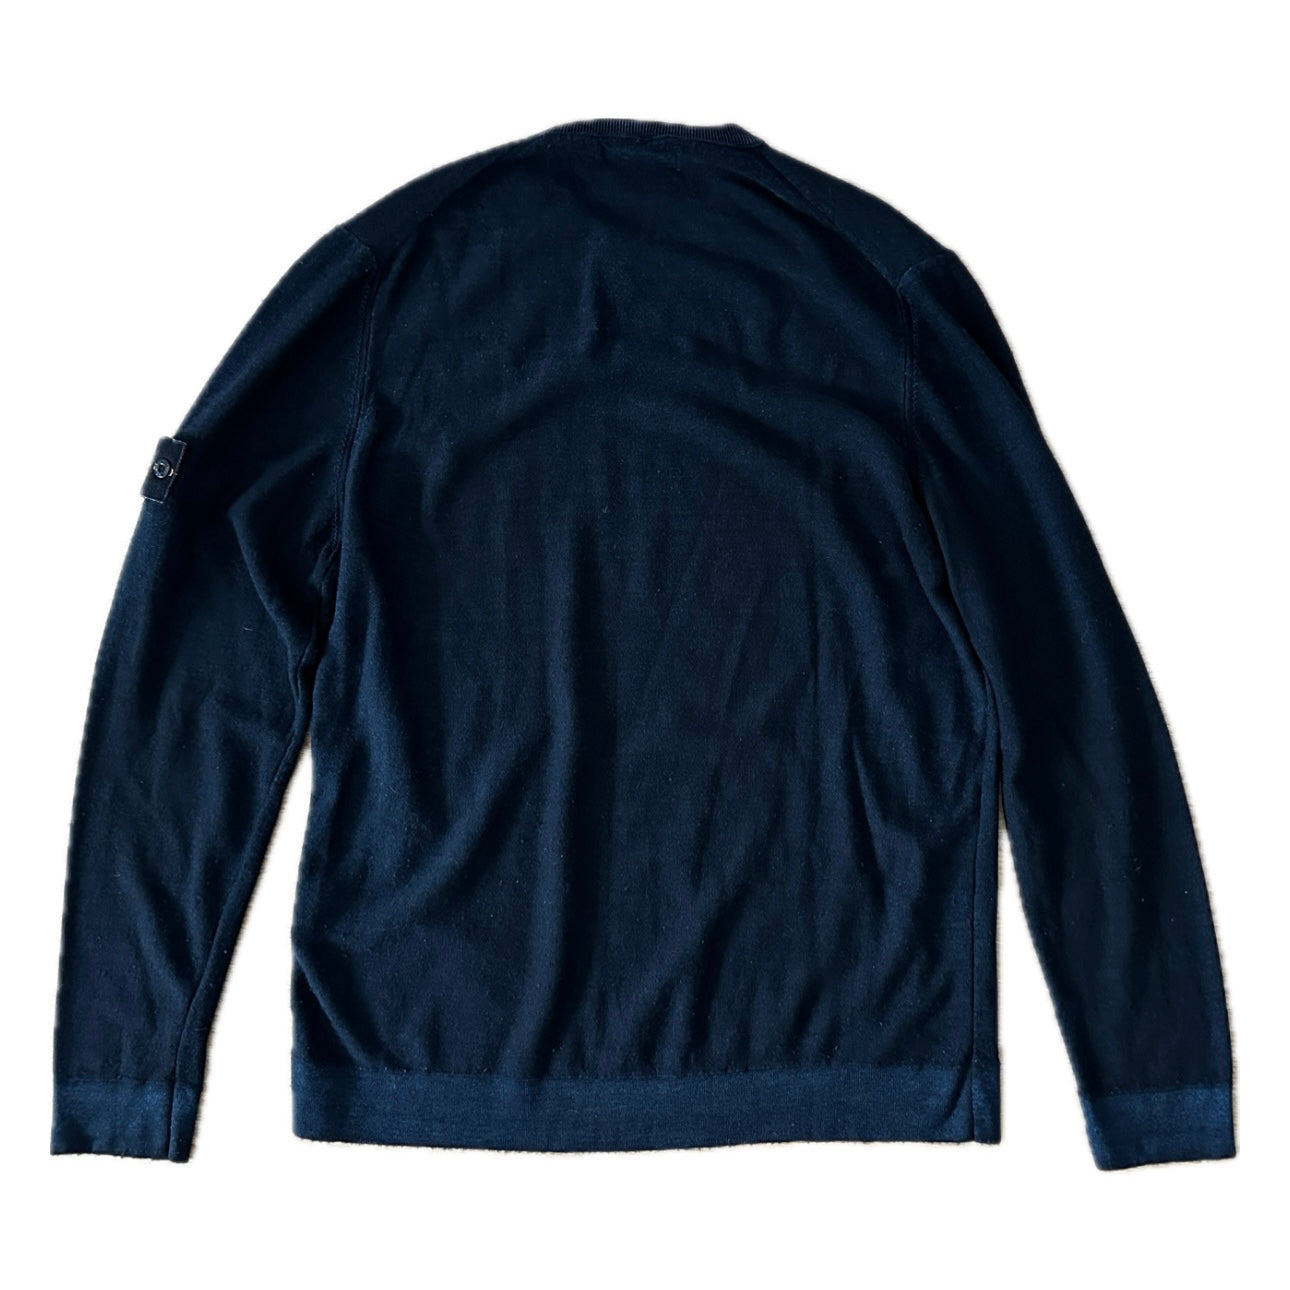 Stone Island 2016 Wool Knit Sweater Navy - 3XL - Made in Italy